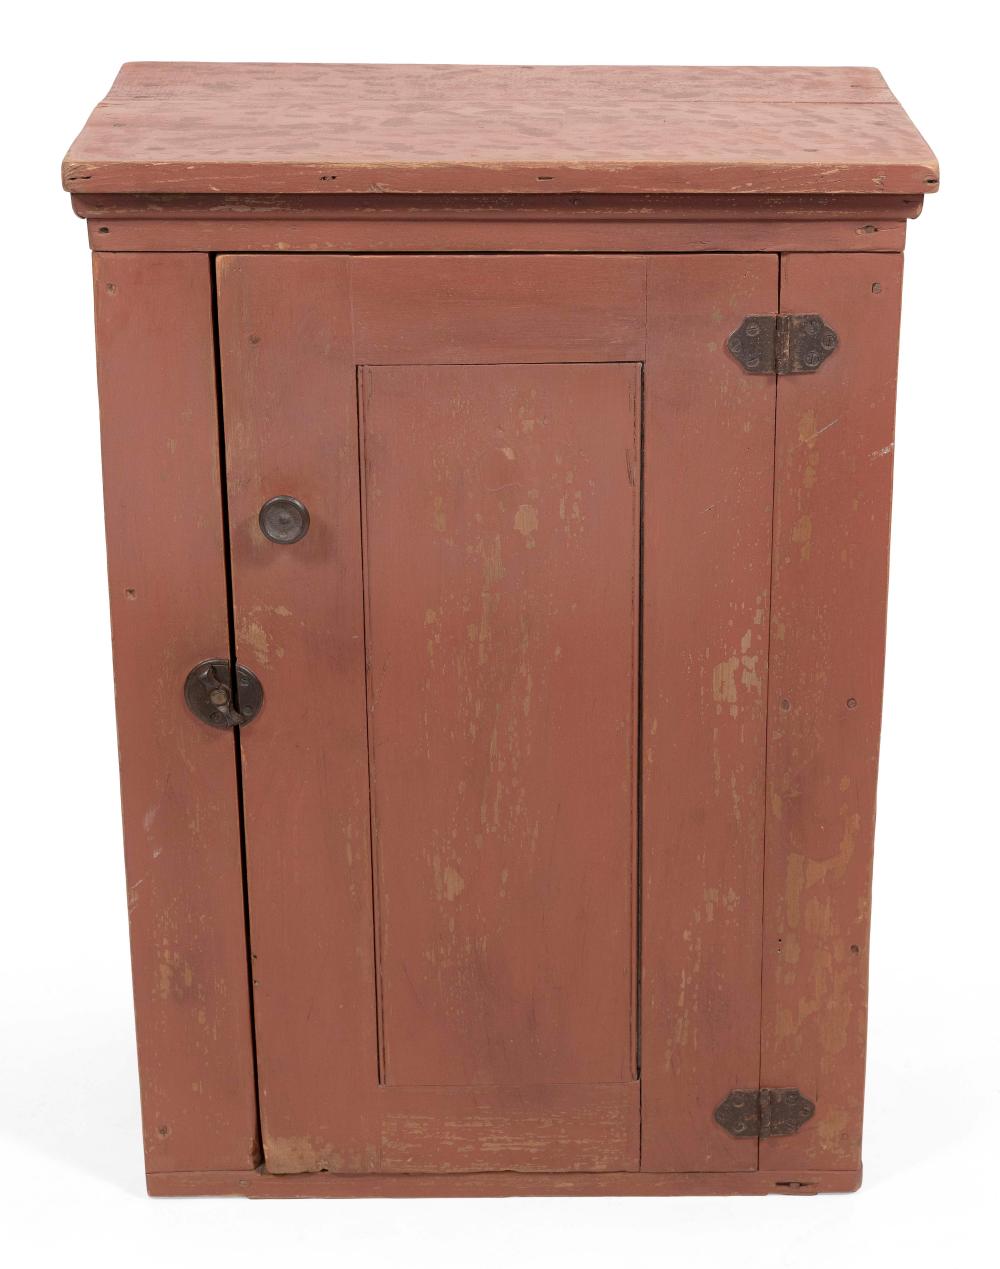 SMALL CUPBOARD LATE 19TH/EARLY